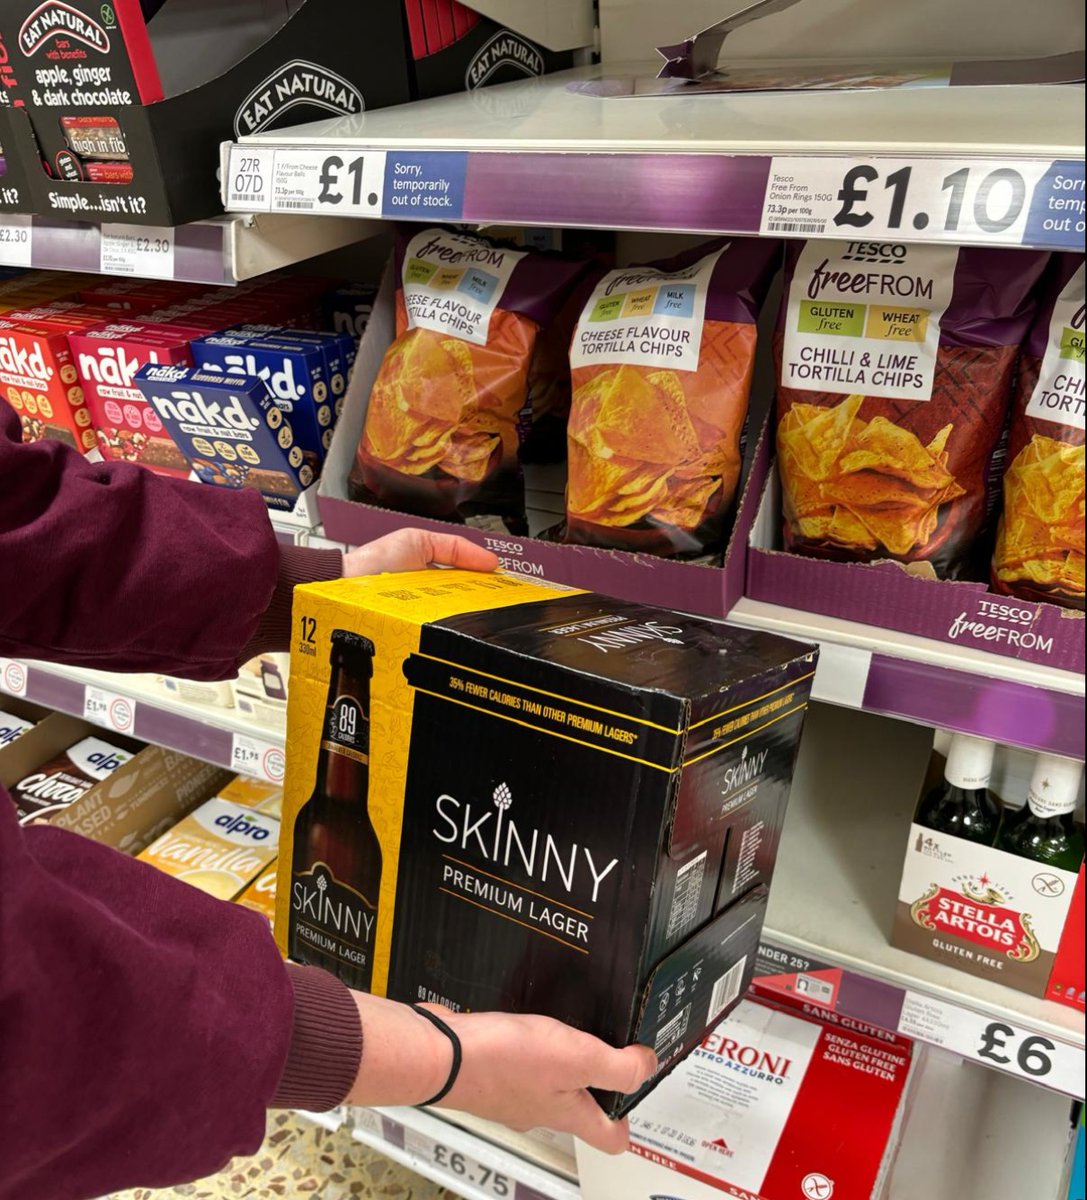 🚨NEW SPECIAL OFFER 🚨

It's time for our 12 packs to shine at @Tesco  😍

Now only £13.50 with a Clubcard 😎

Buy online 👉zurl.co/dC1Q 

Buy in-store 👉 head to the free-from aisle 

#Promotion #DrinkAware #SpecialOffer